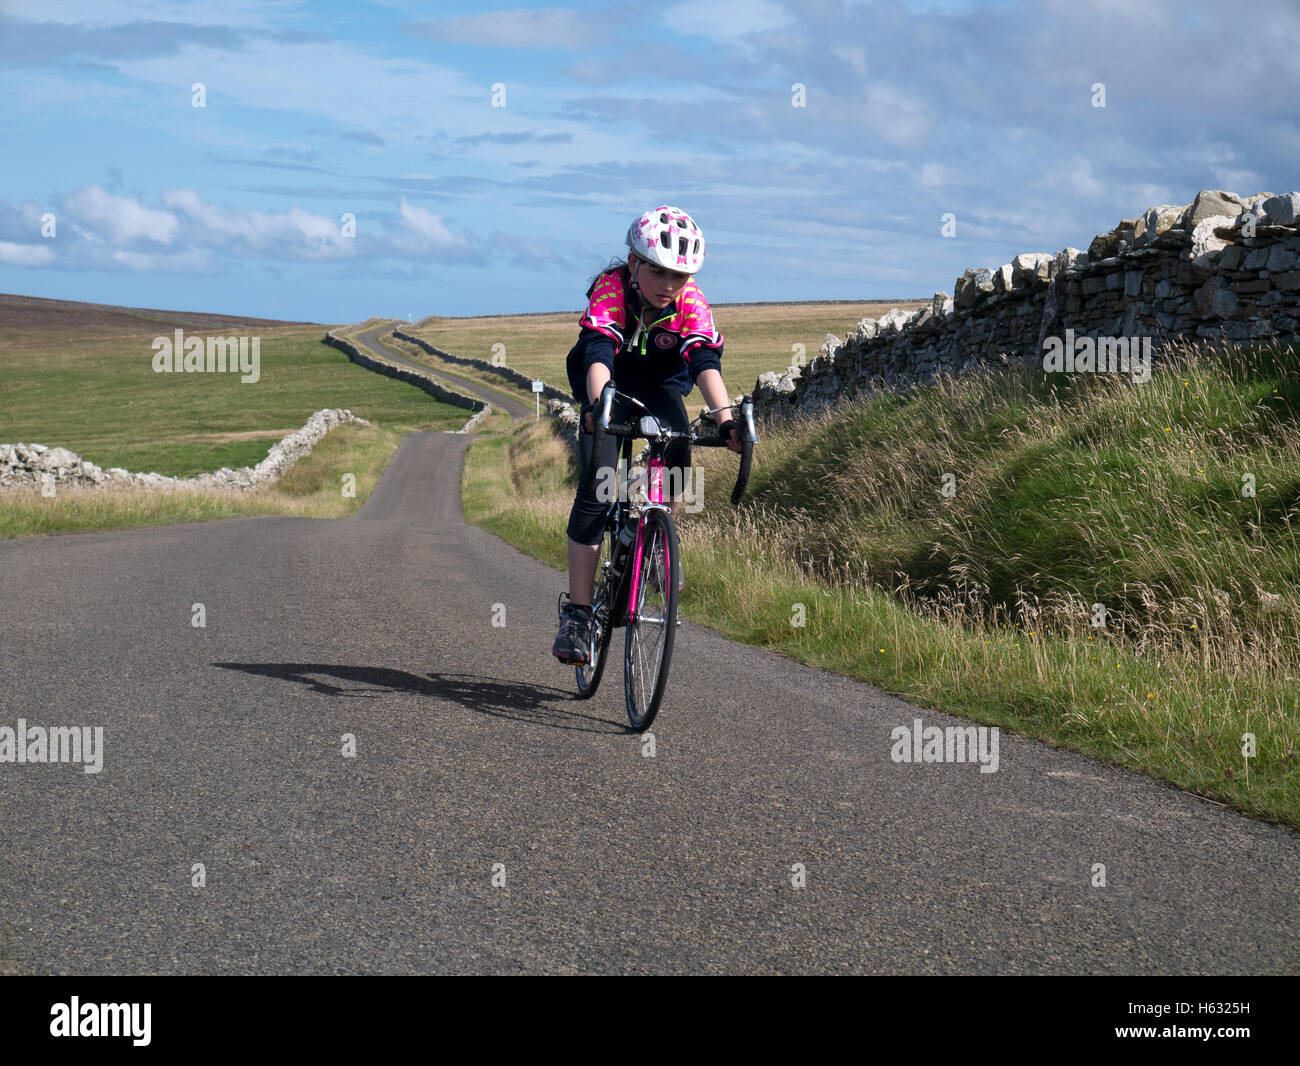 Young girl on racing bike on quiet country roads Stock Photo